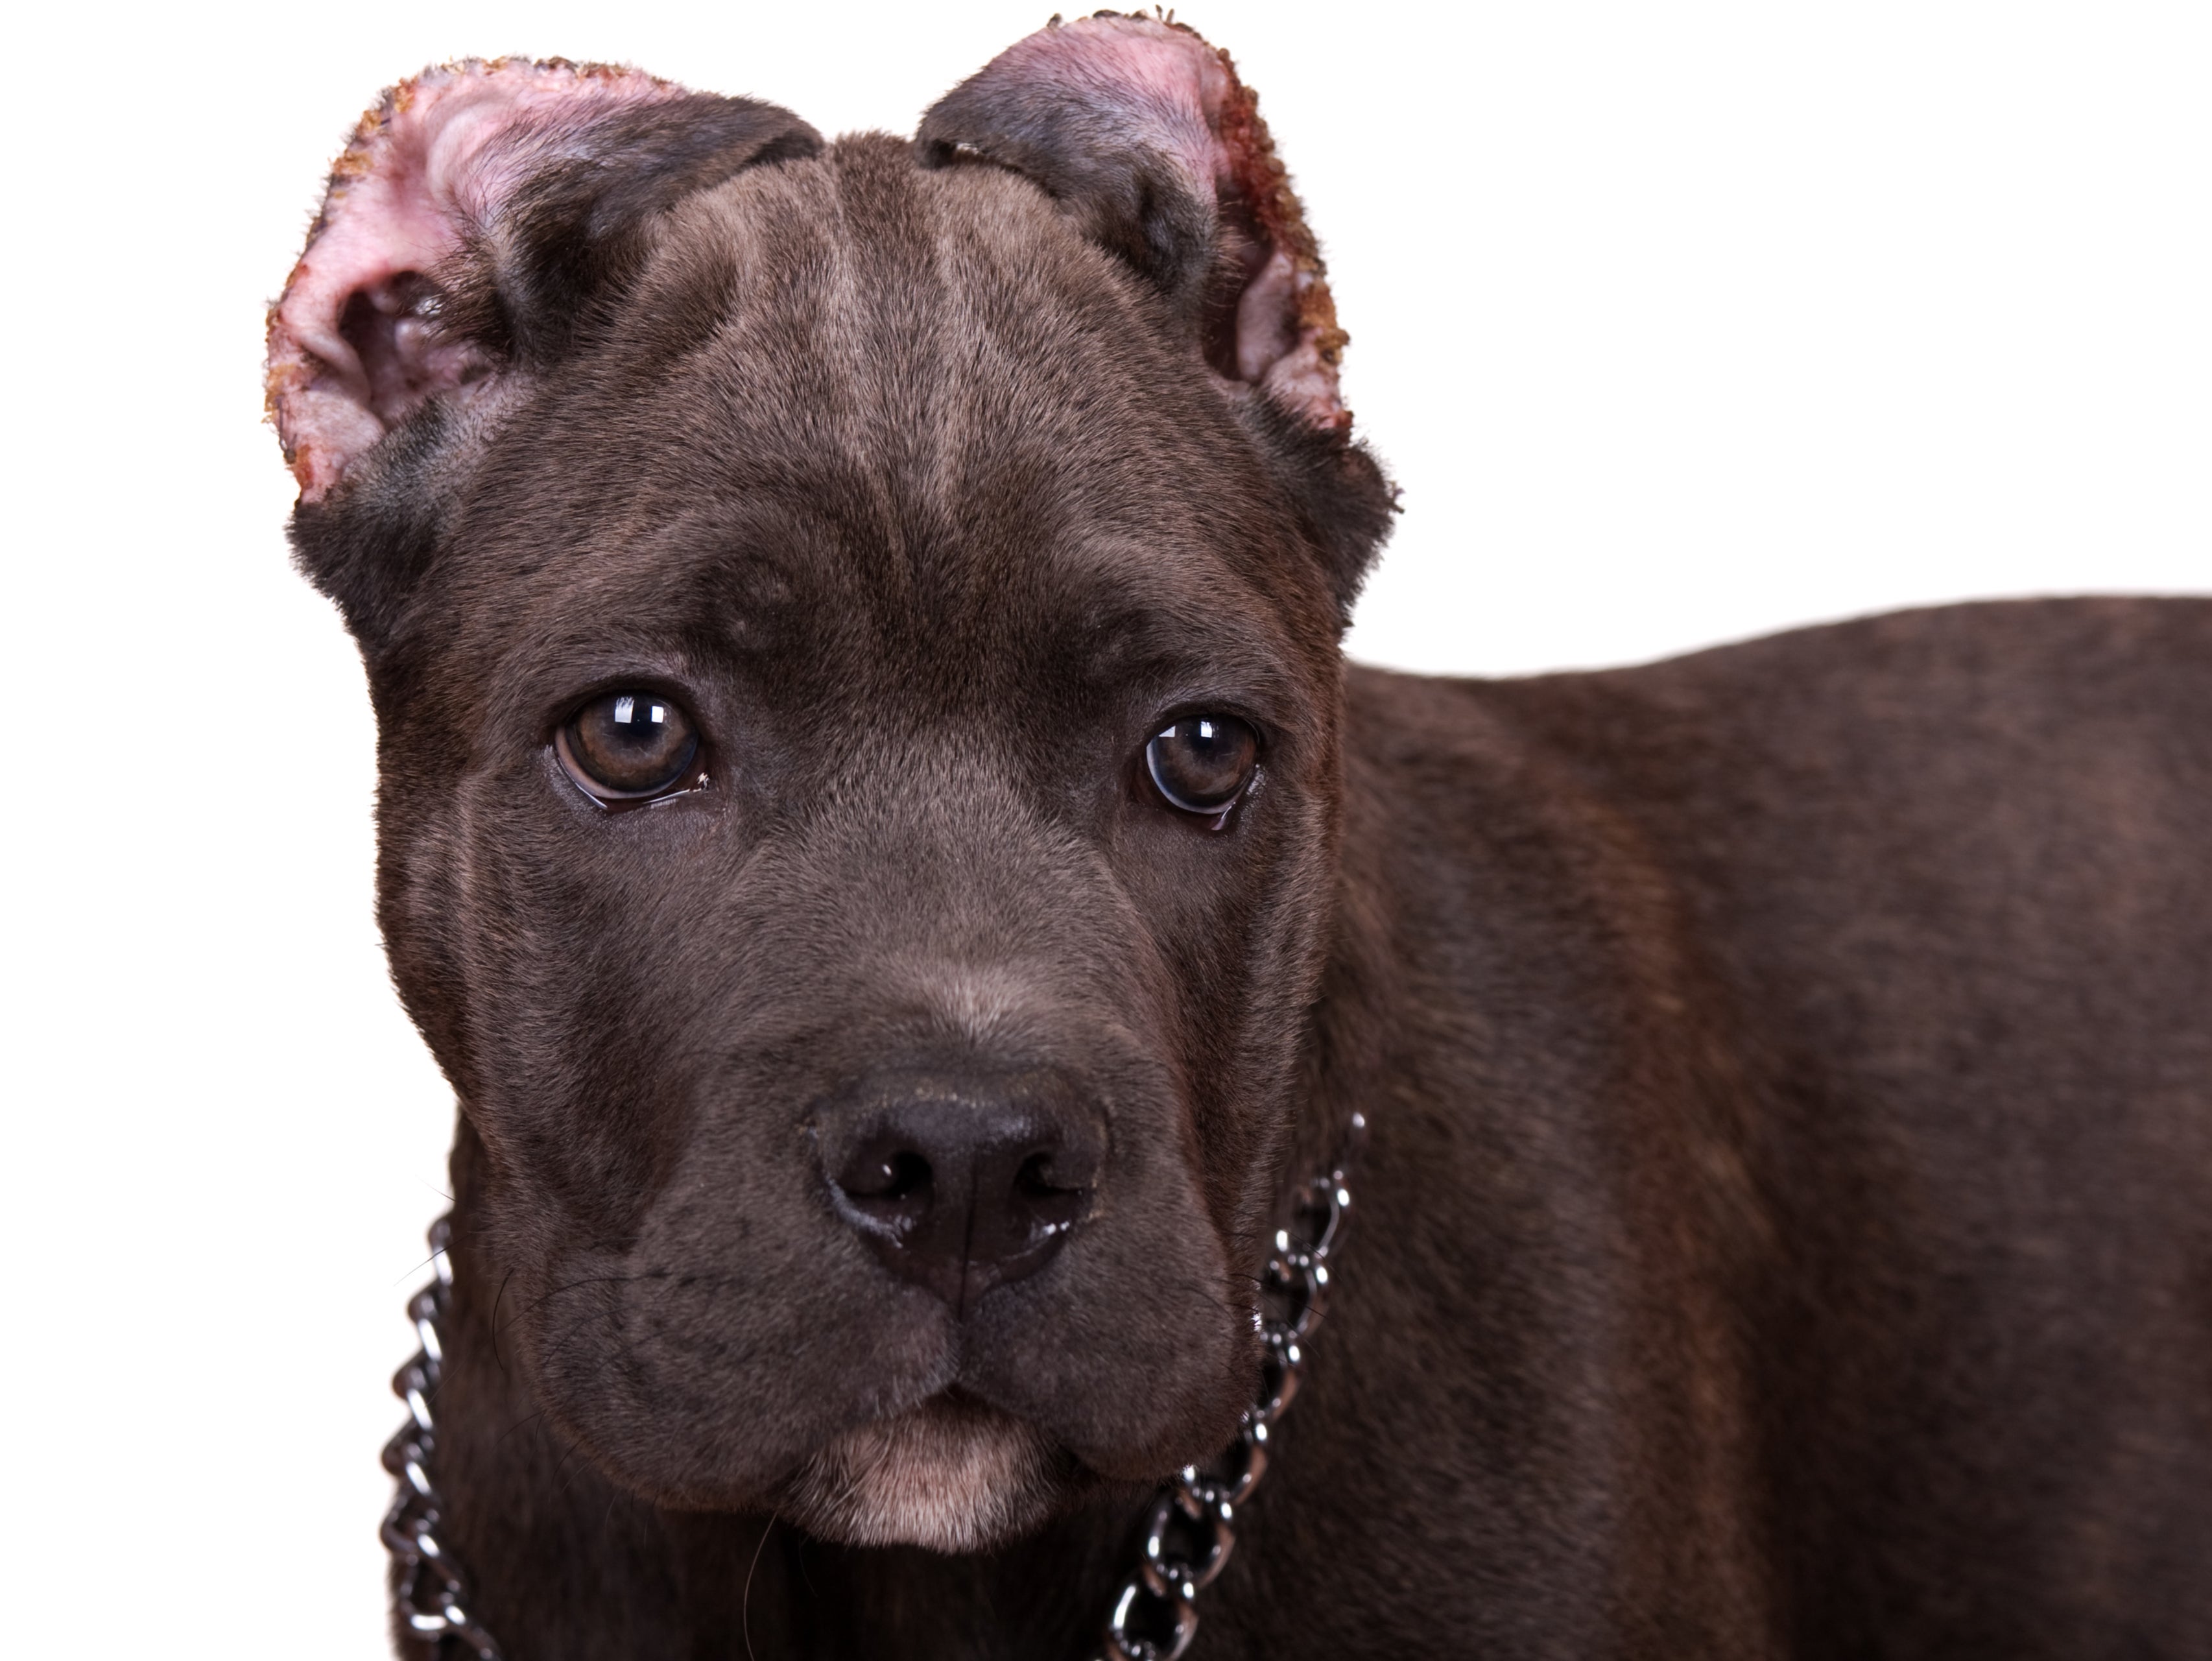 Dogs with cropped ears may still be imported